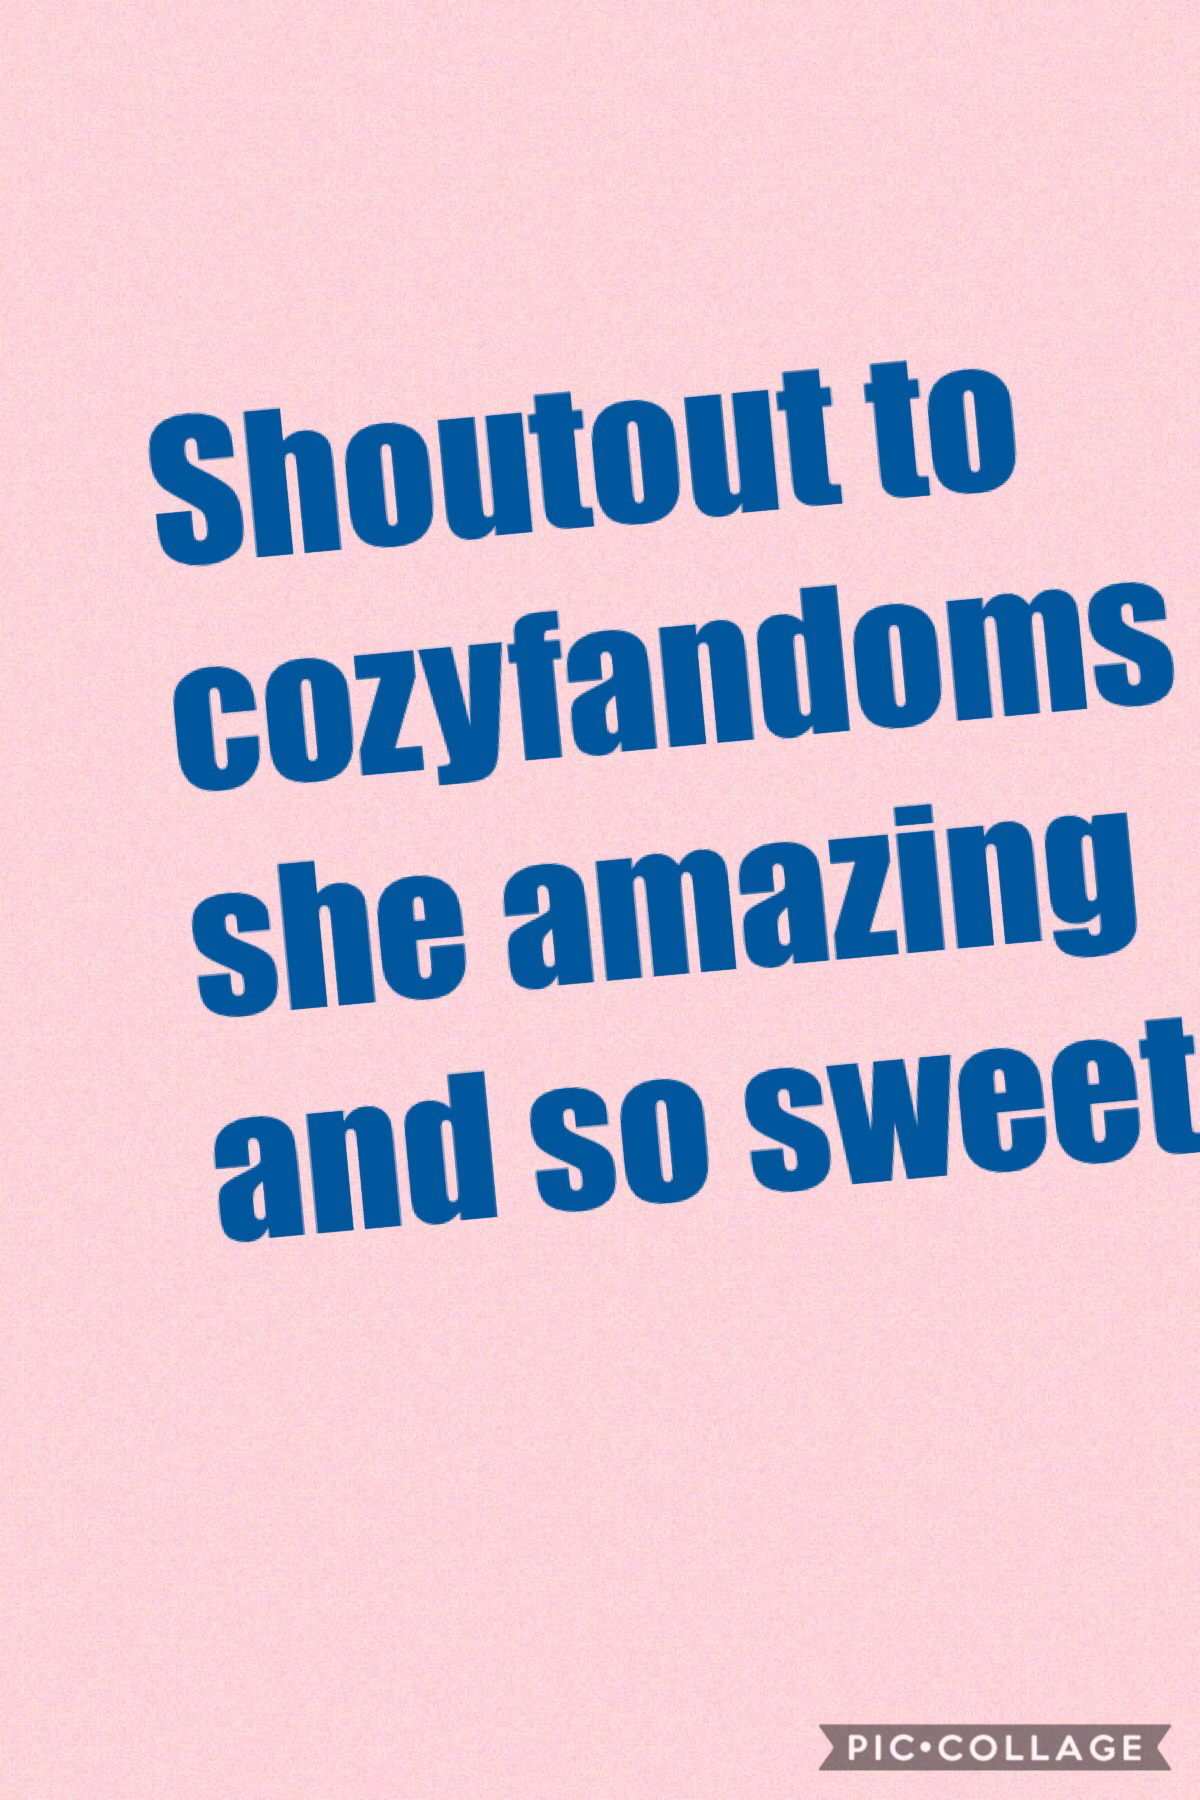 Shoutout to cosyfandoms she amazing and so sweet 